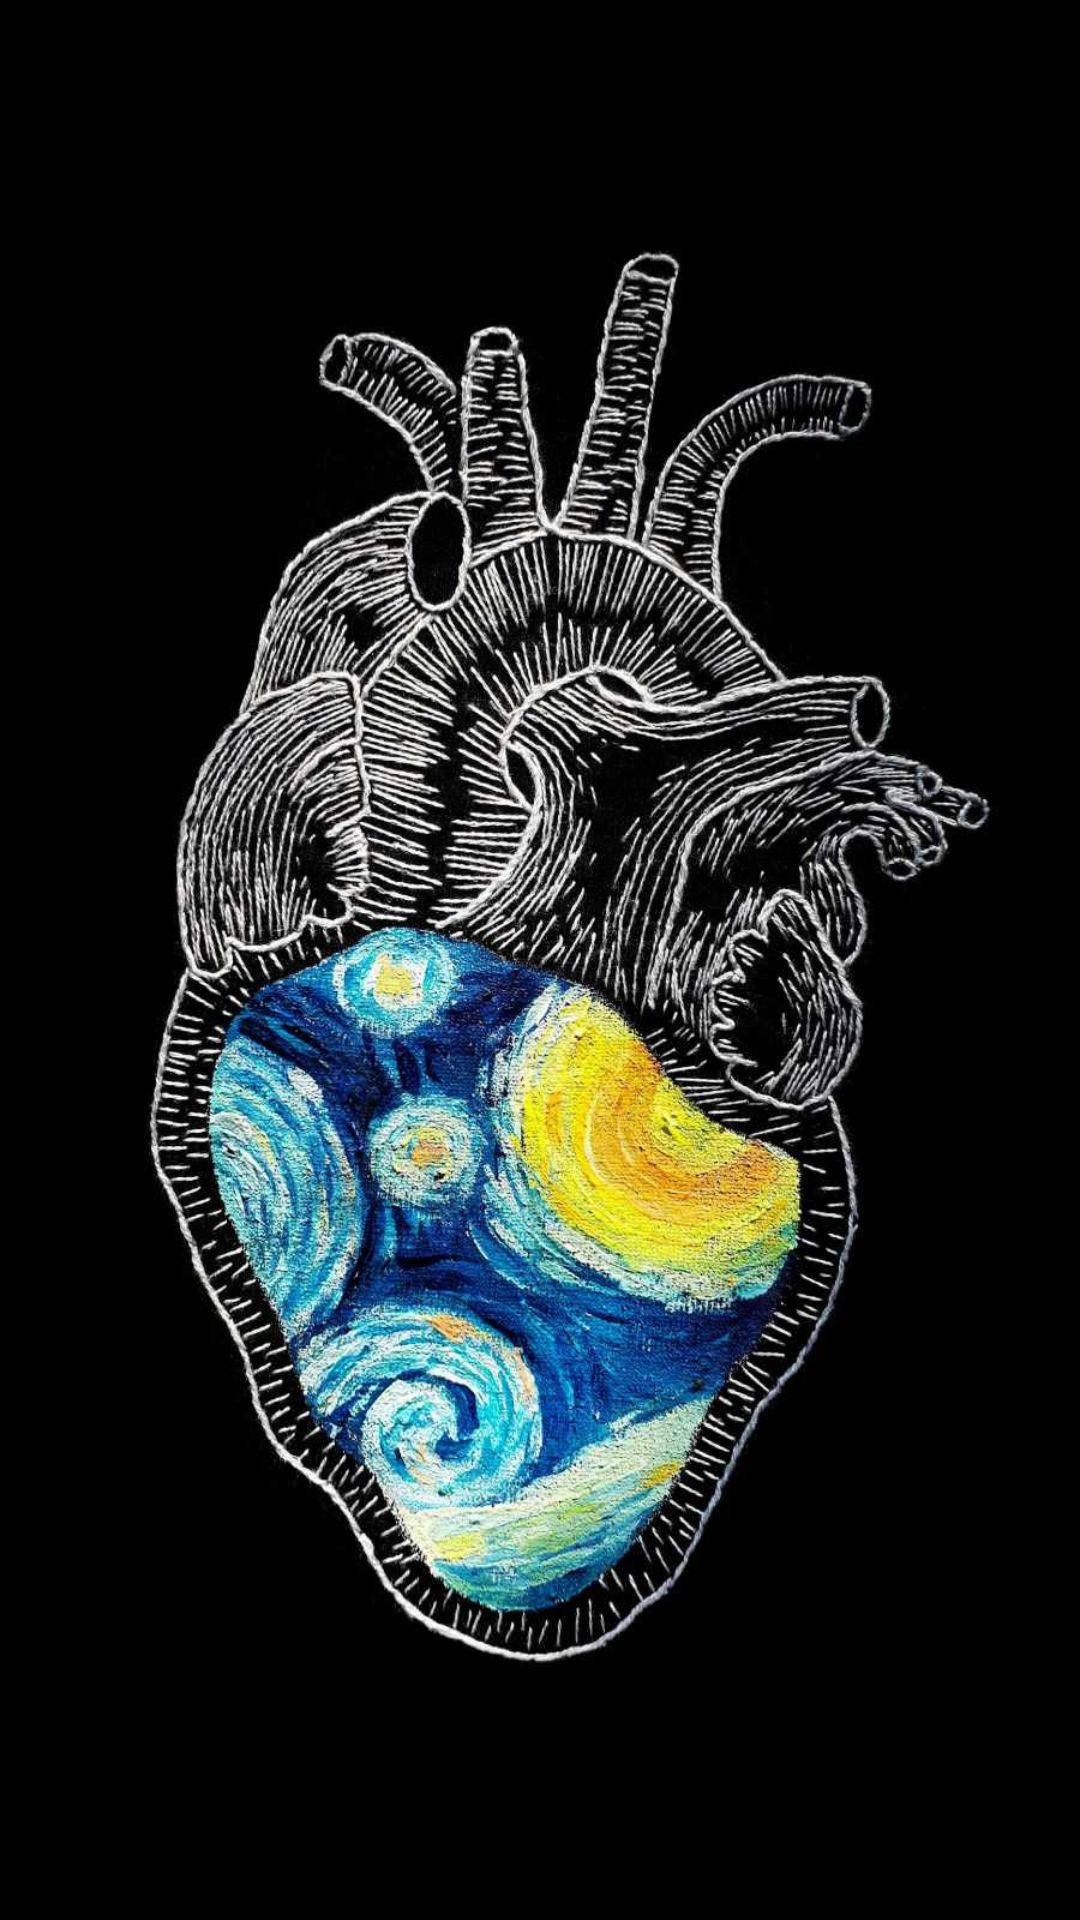 Black Heart With Starry Night Background